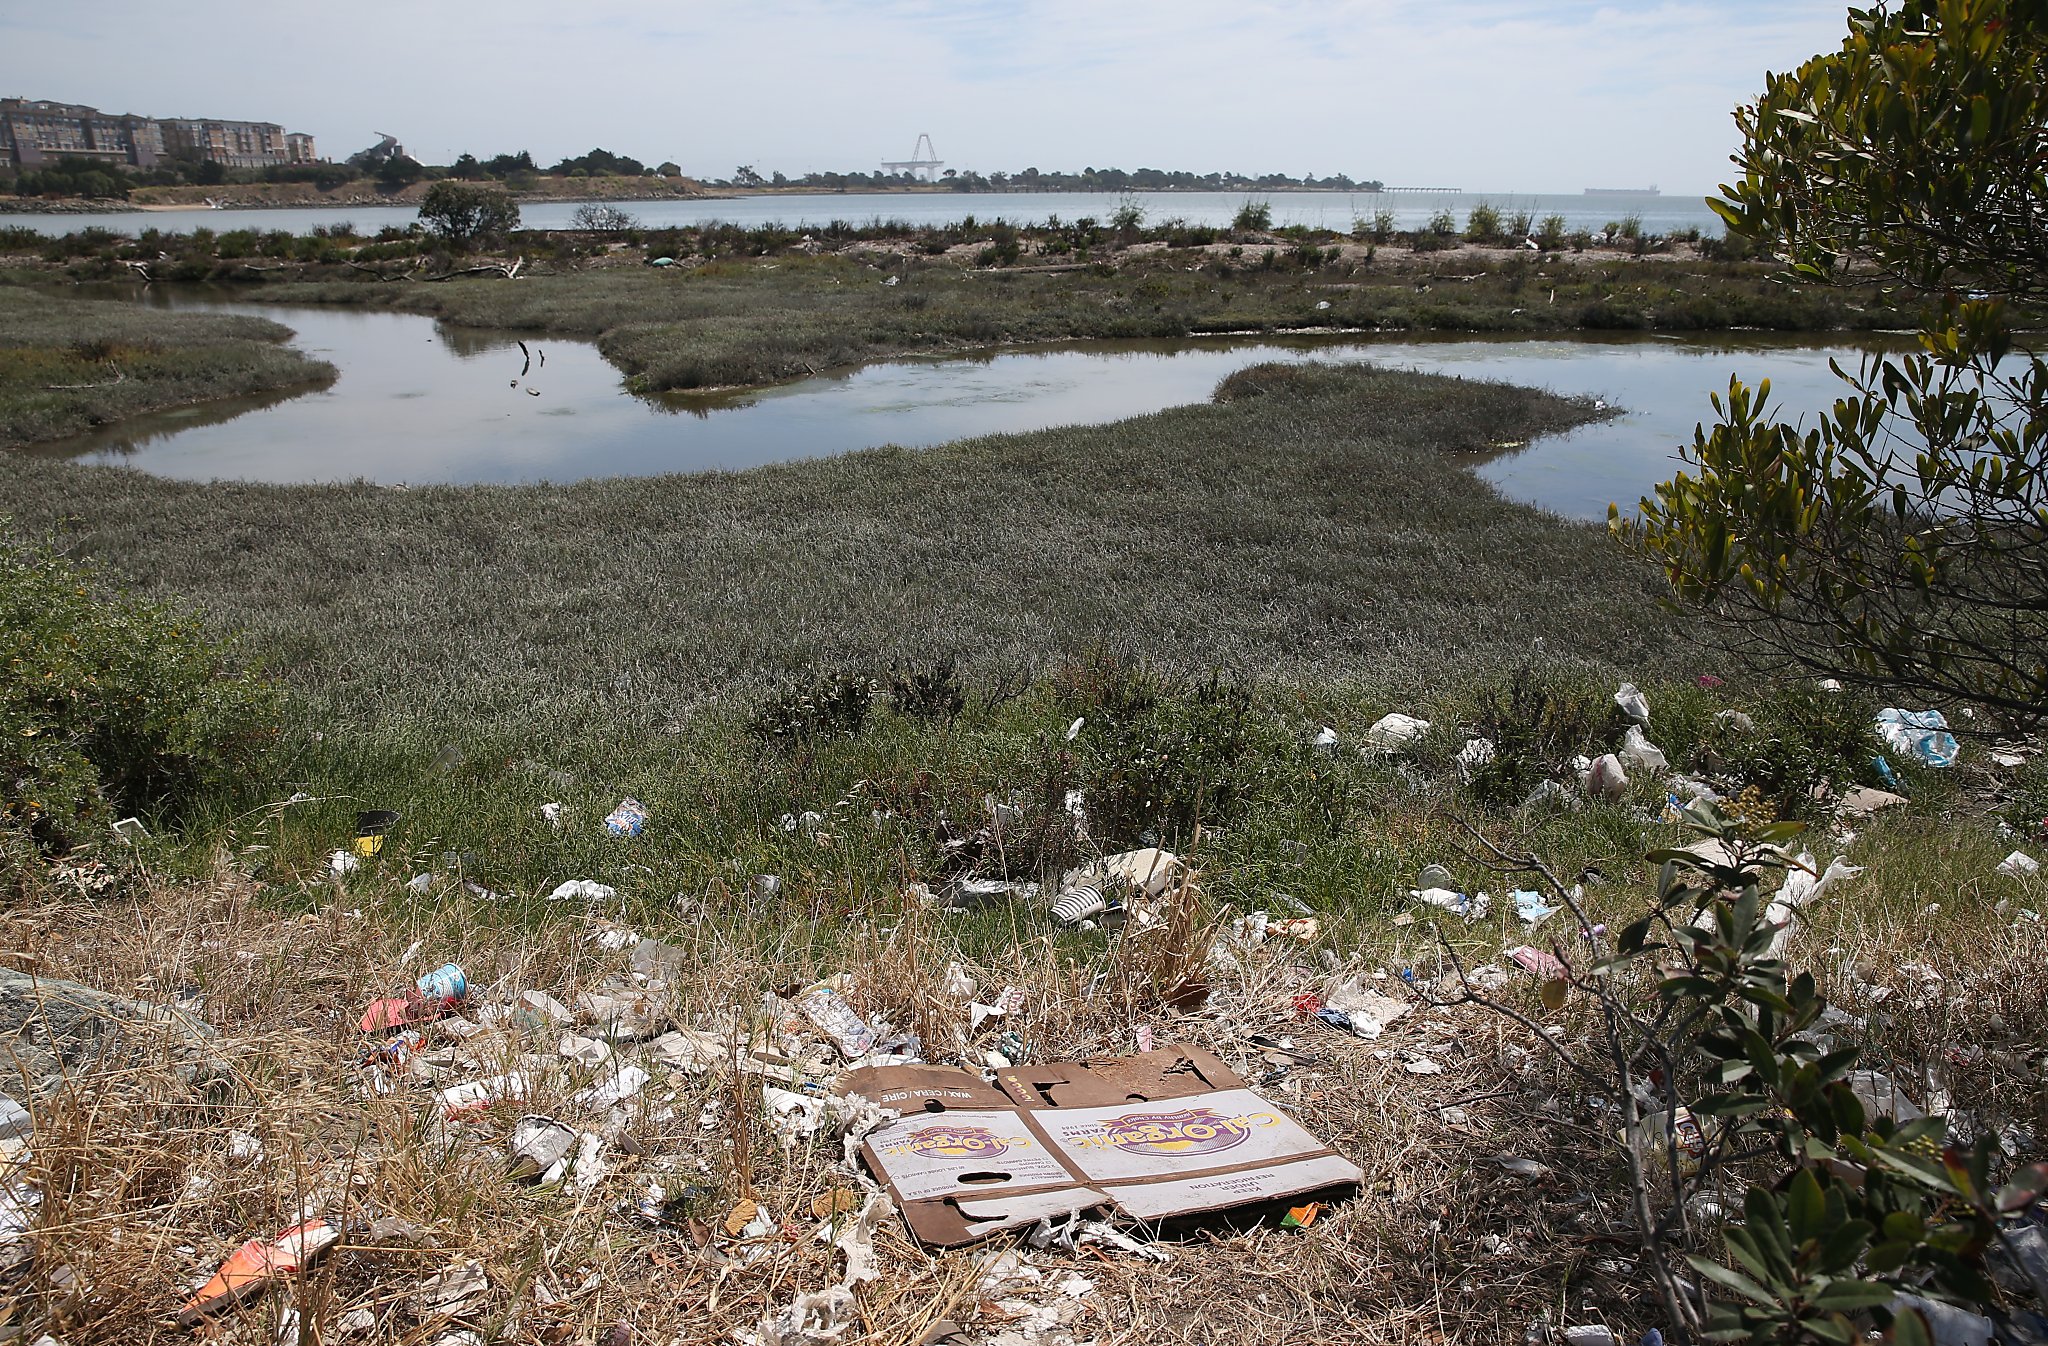 Beach water quality improved due to drought - SFGate2048 x 1346